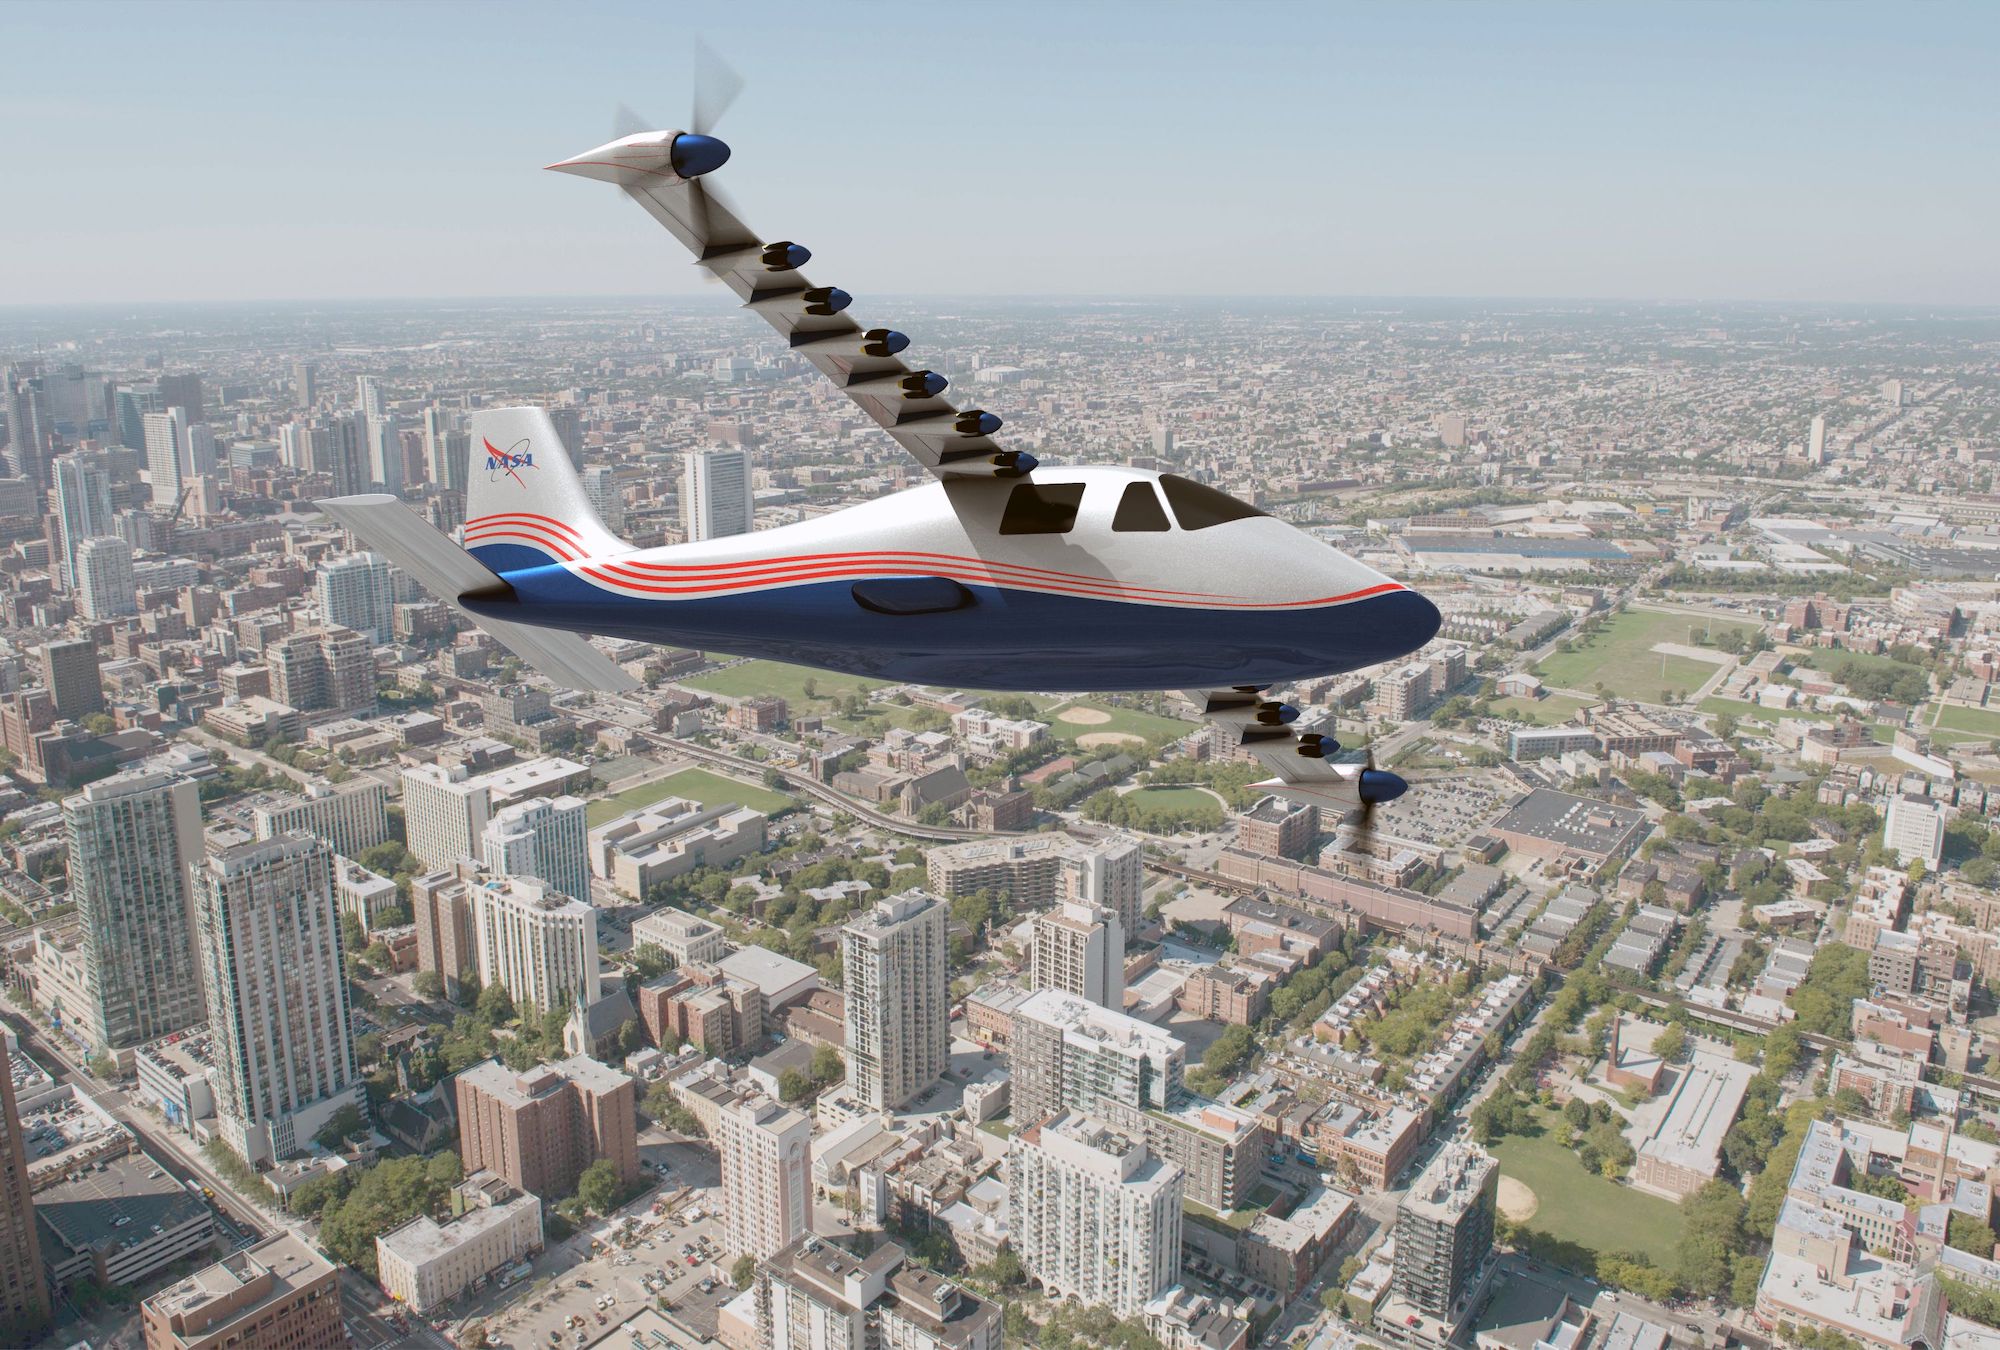 NASA intends to fly its experimental electric plane this year